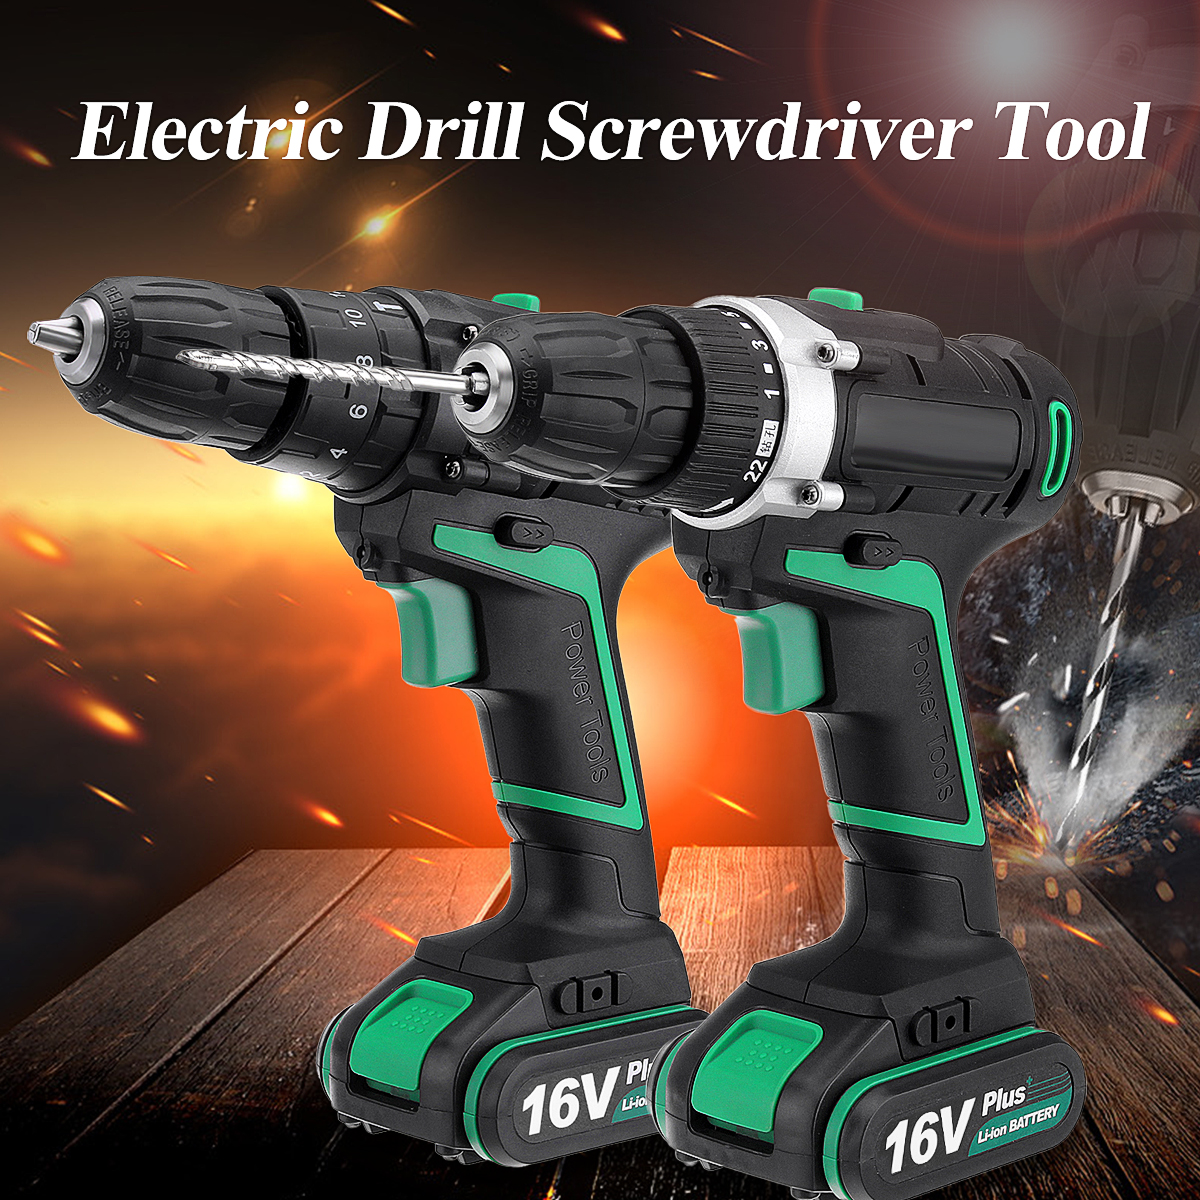 AC-100-240V-Lithium-Cordless-Electric-Screwdriver-Screw-Drill-Driver-Tool-15Ah-1-Charger-1-Battery-1286920-1